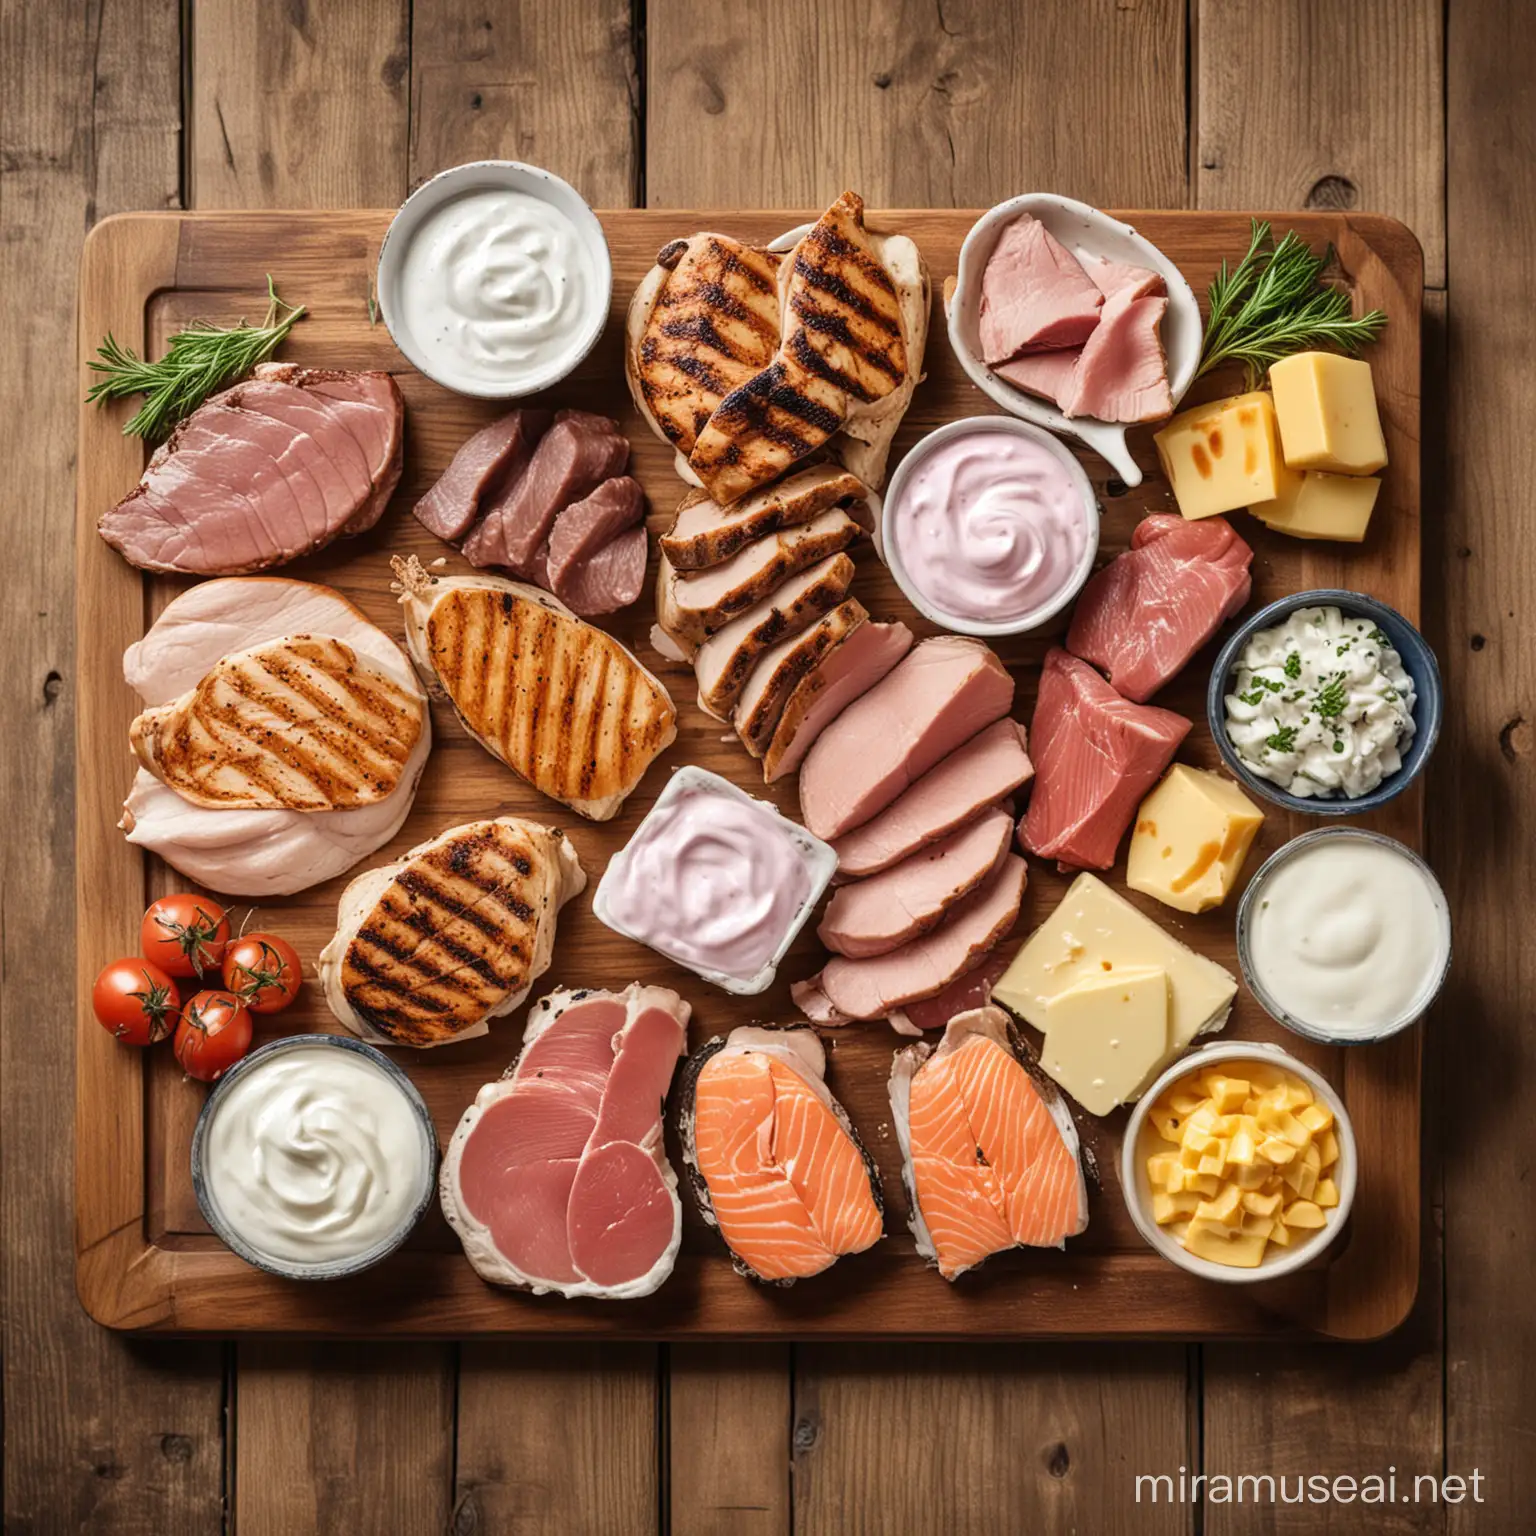 An assortment of animal-based protein sources arranged on a rustic wooden table or cutting board. Include images of grilled chicken breasts, salmon fillets, lean beef steaks, and a variety of dairy products like Greek yogurt and cheese. This image visually represents the diversity of protein options available from the animal kingdom.